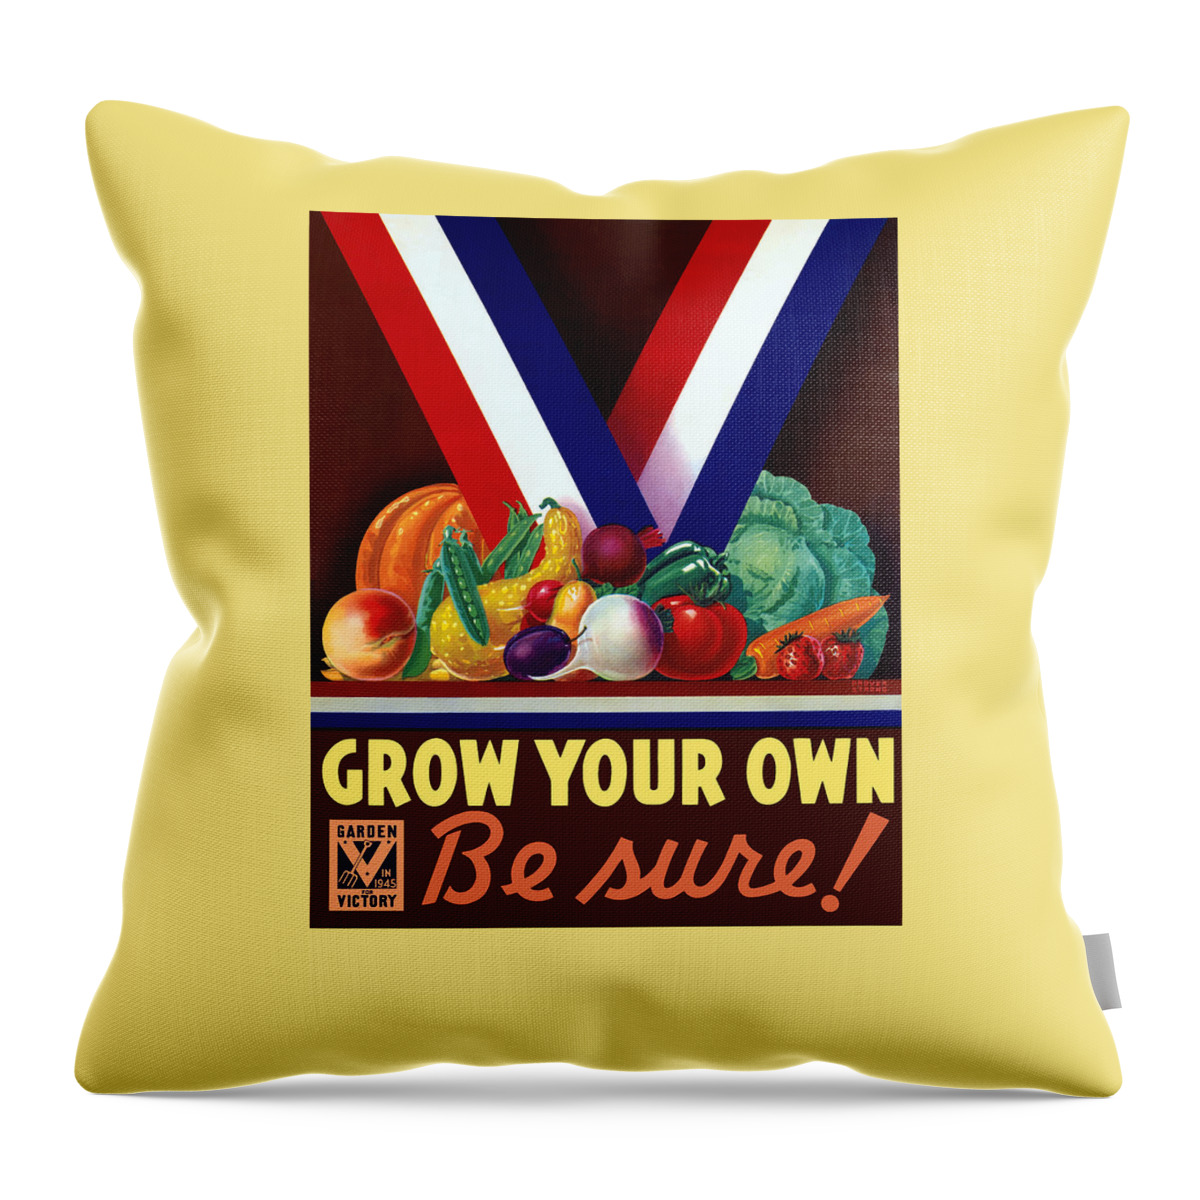 Wwii Throw Pillow featuring the painting Grow Your Own Victory Garden by War Is Hell Store